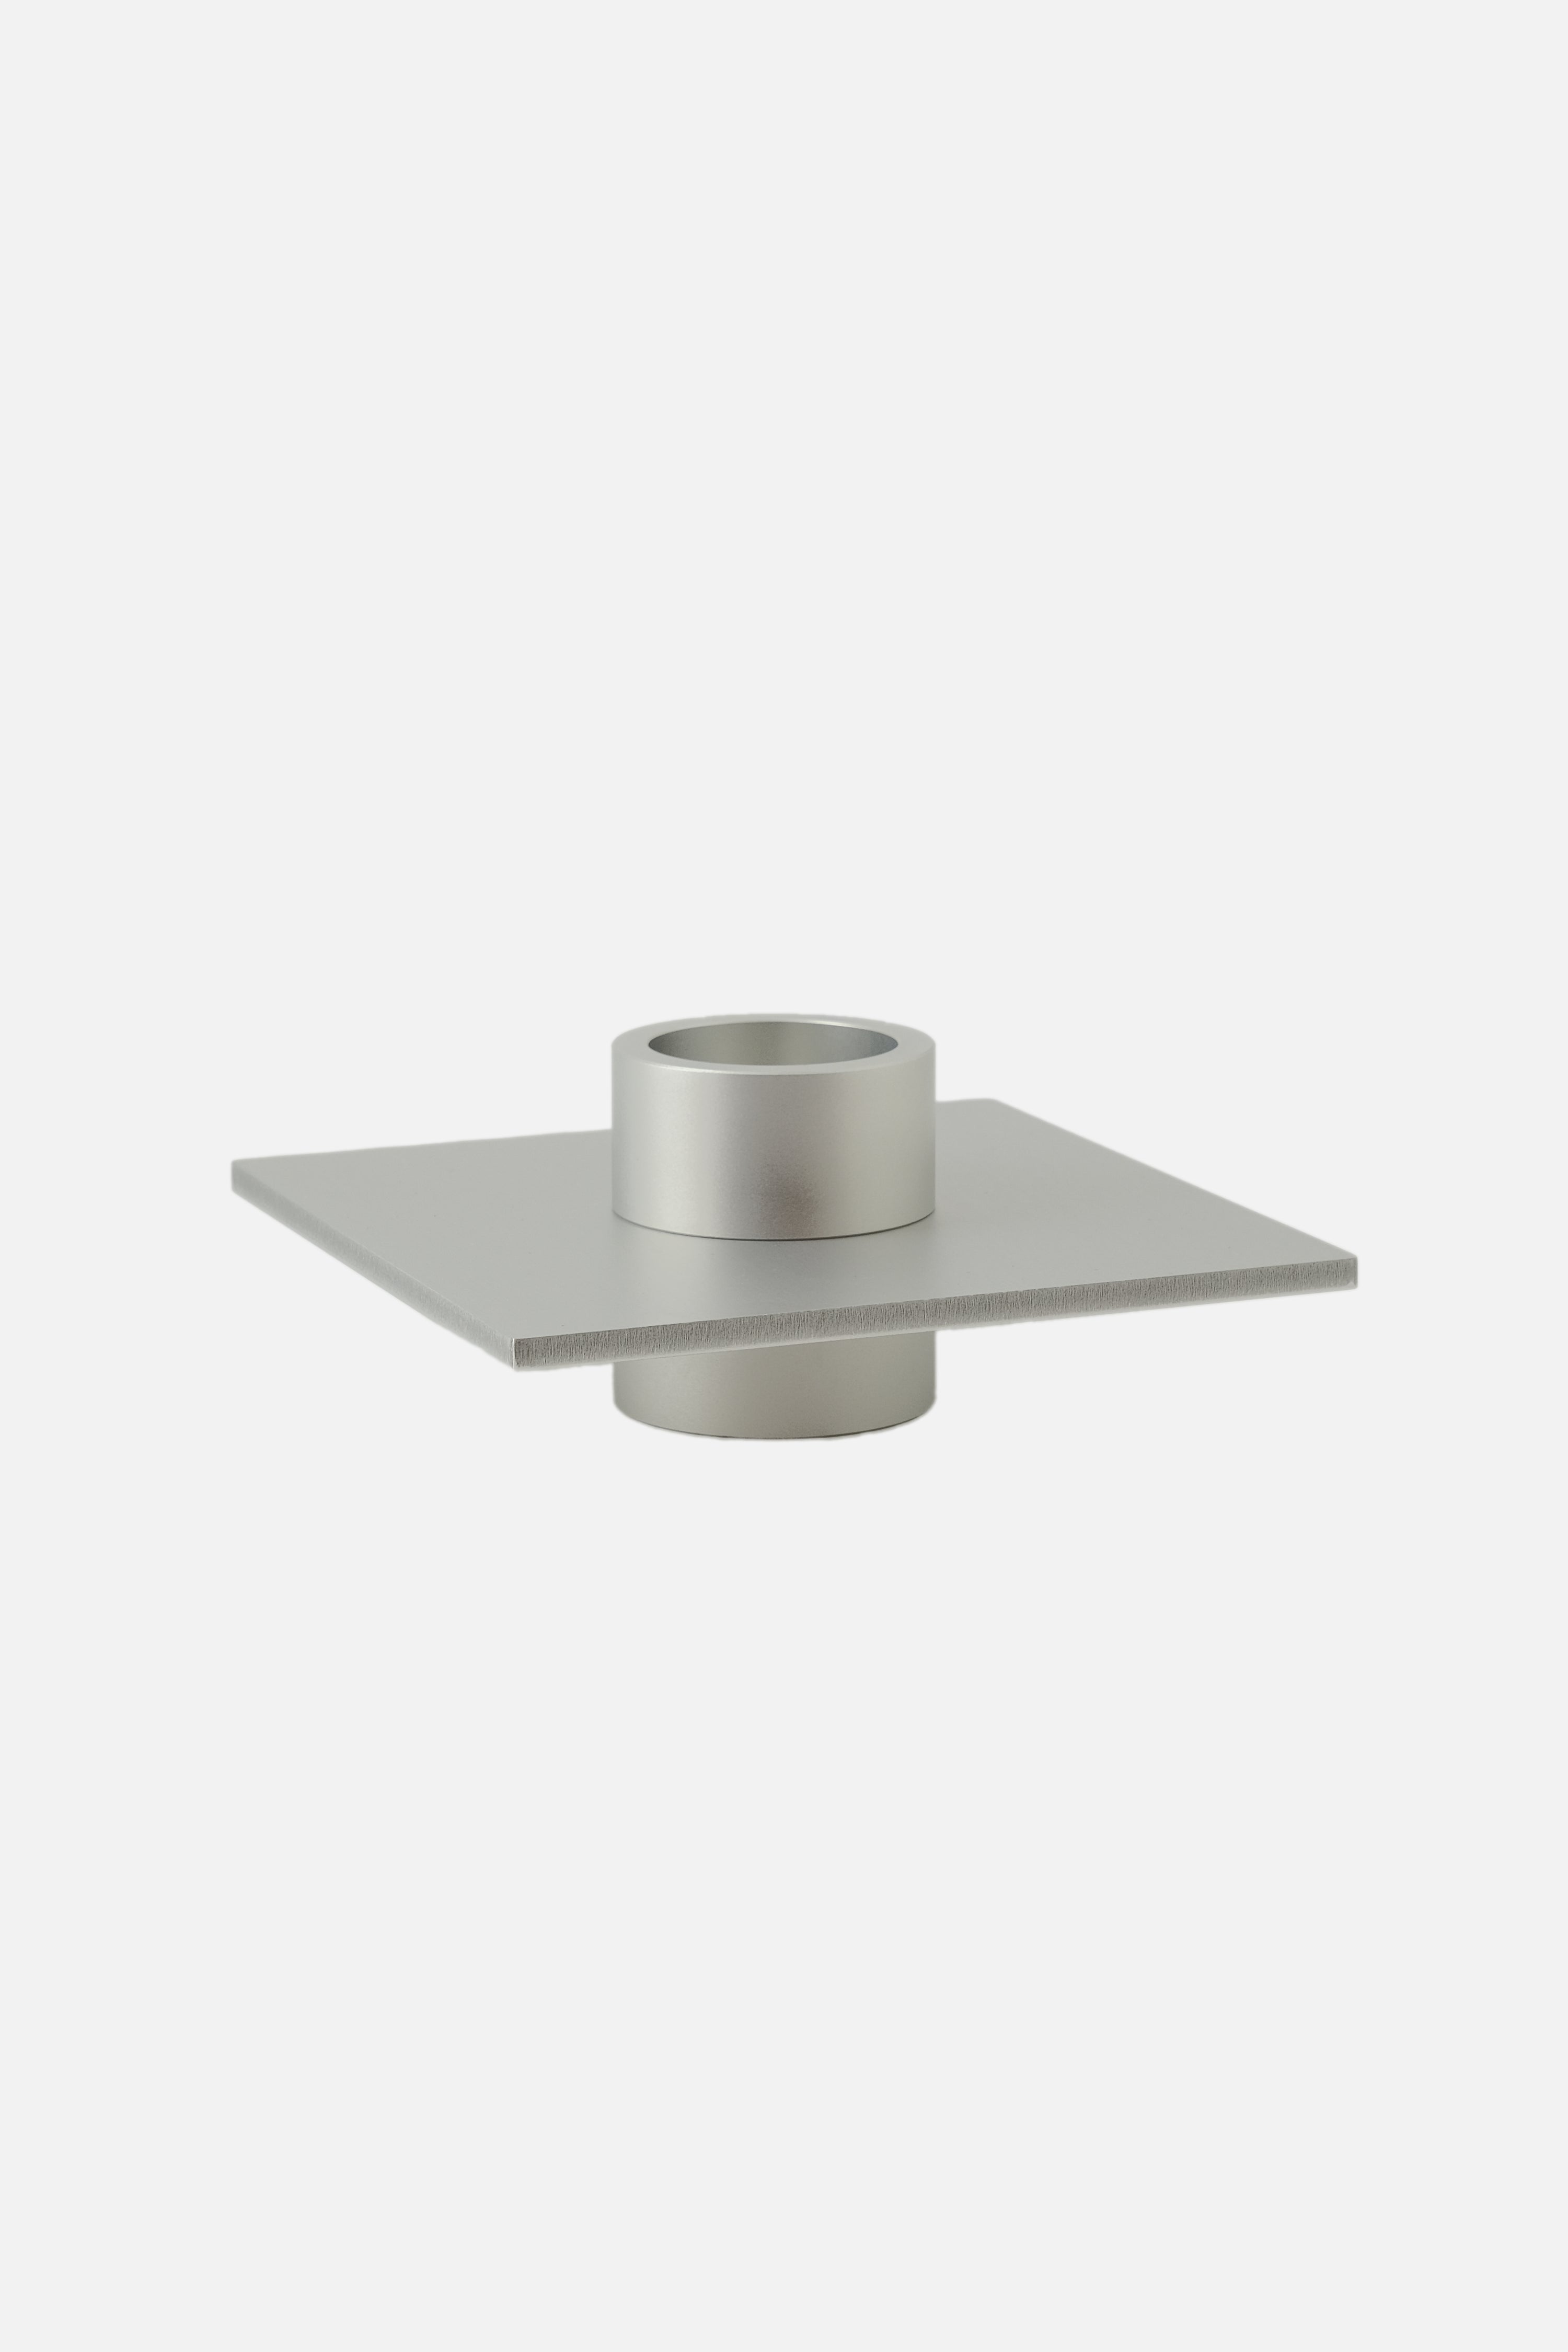 P-L 05 Candle holder